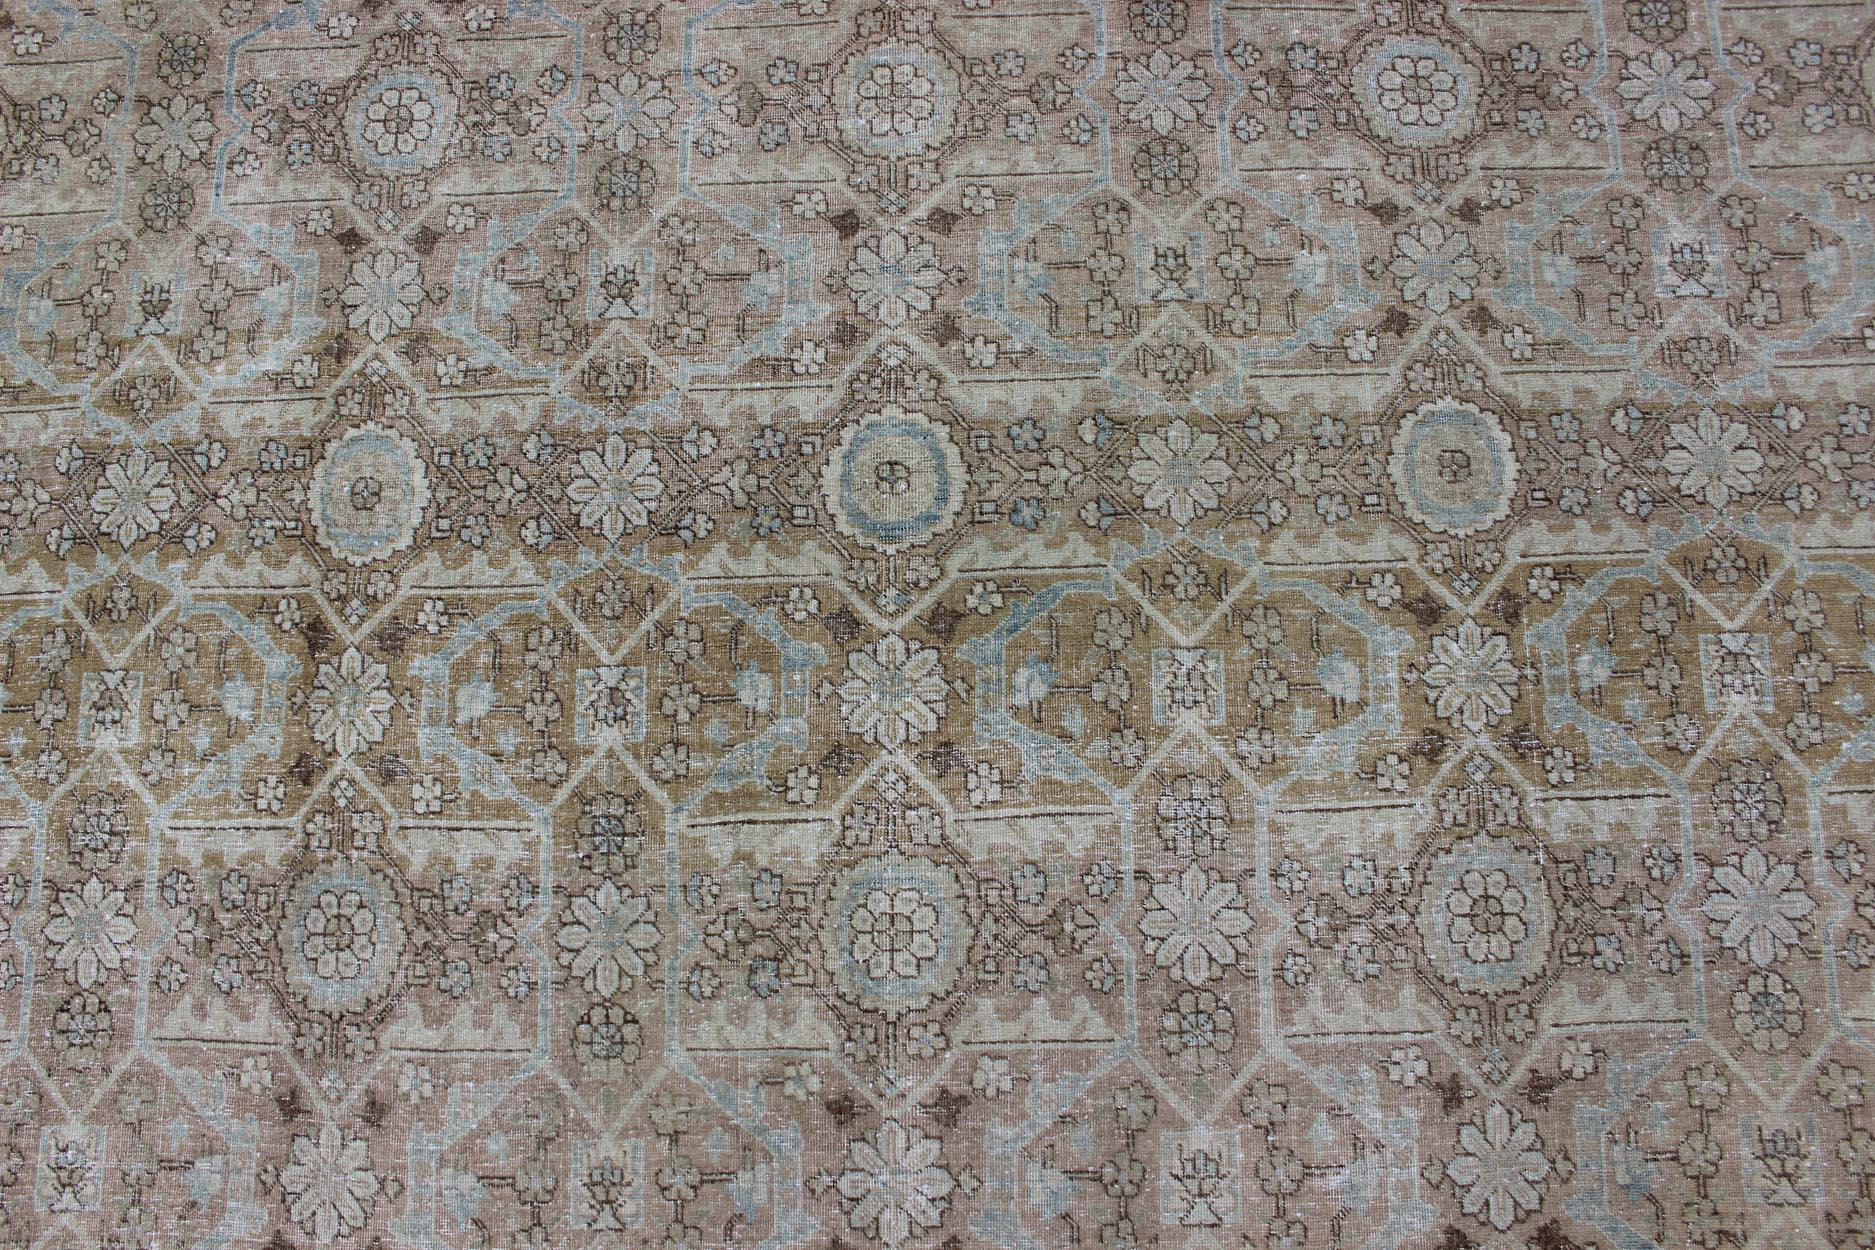 Antique Persian Tabriz with All-Over Floral Design in Ivory, Blue, Blush, Brown For Sale 3